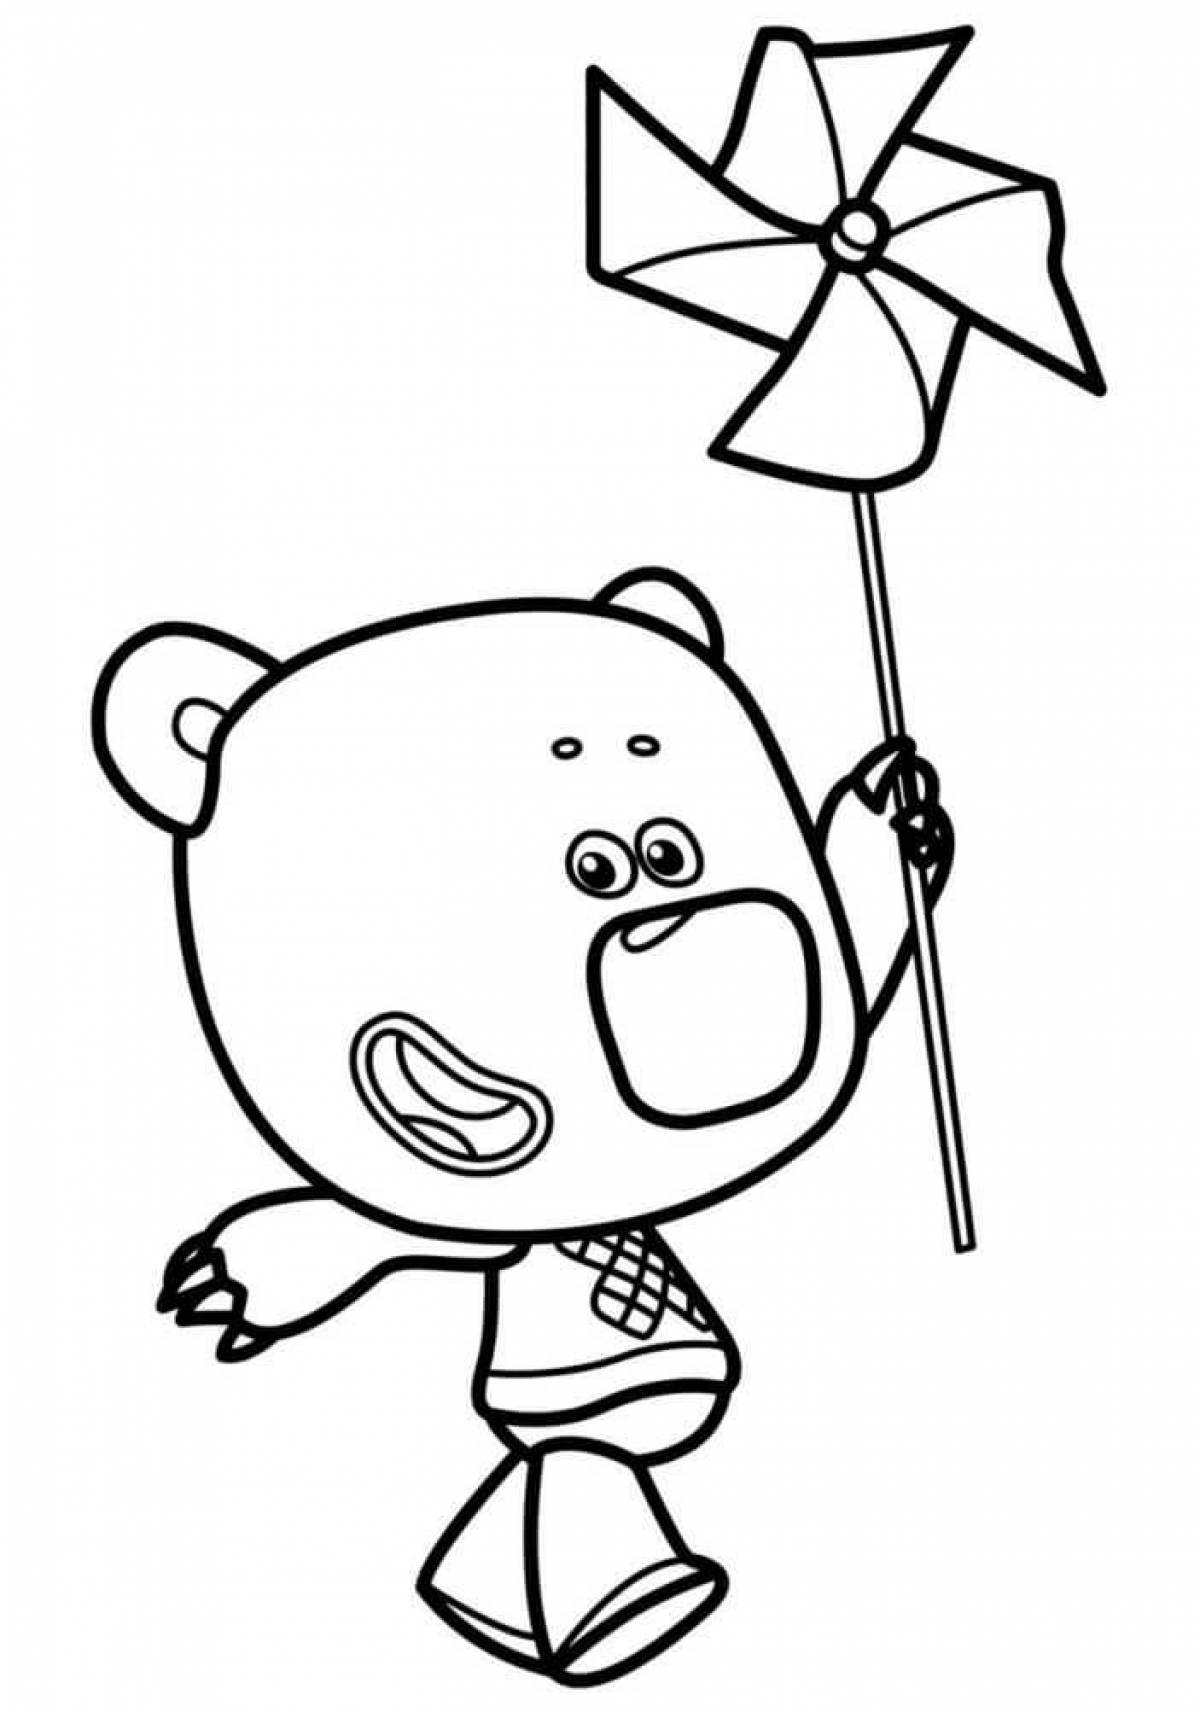 Furry bear coloring pages